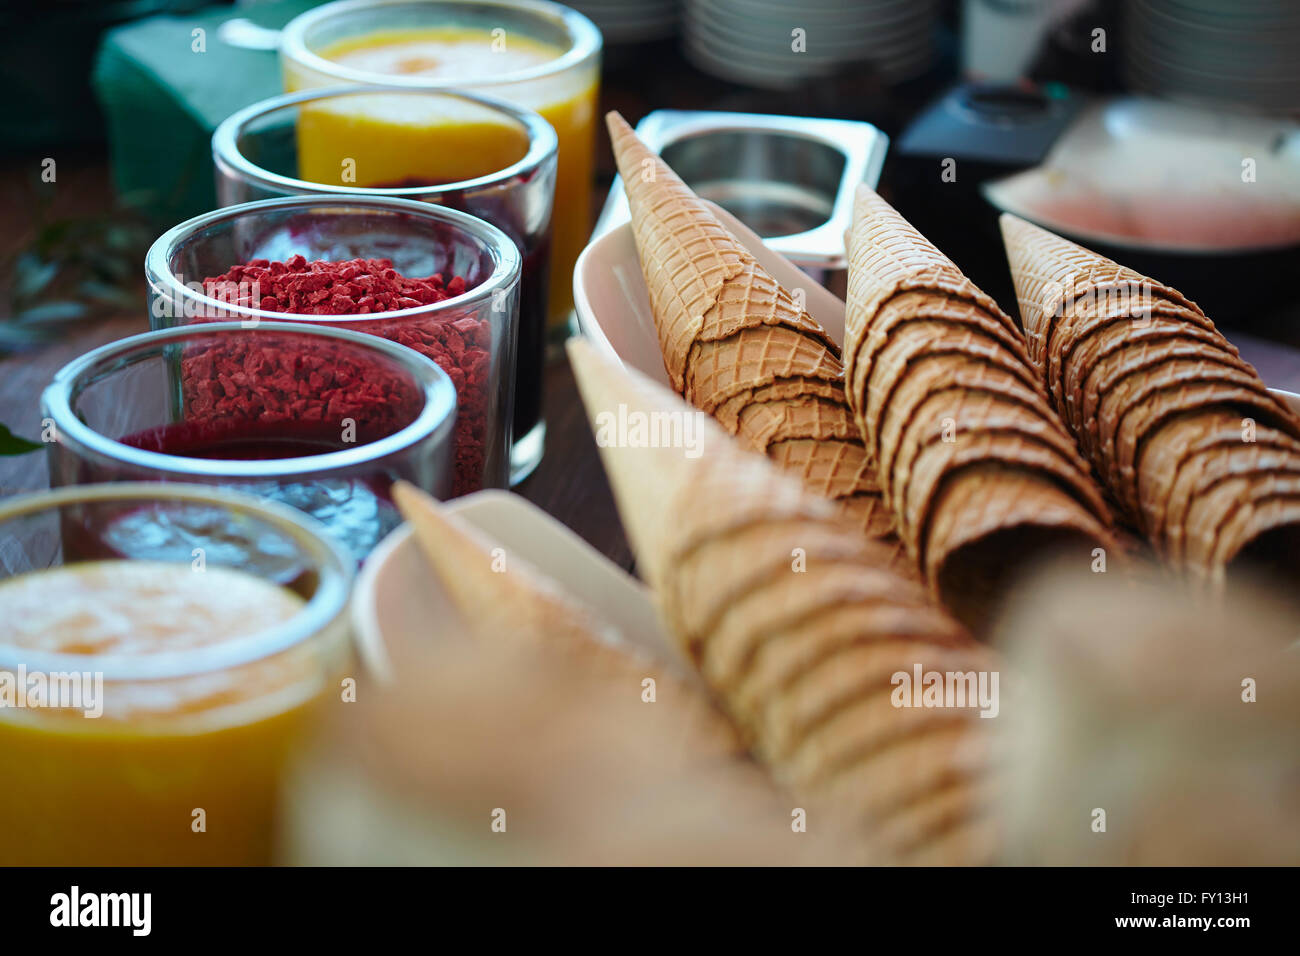 Ice cream cones and various flavored syrups at store Stock Photo